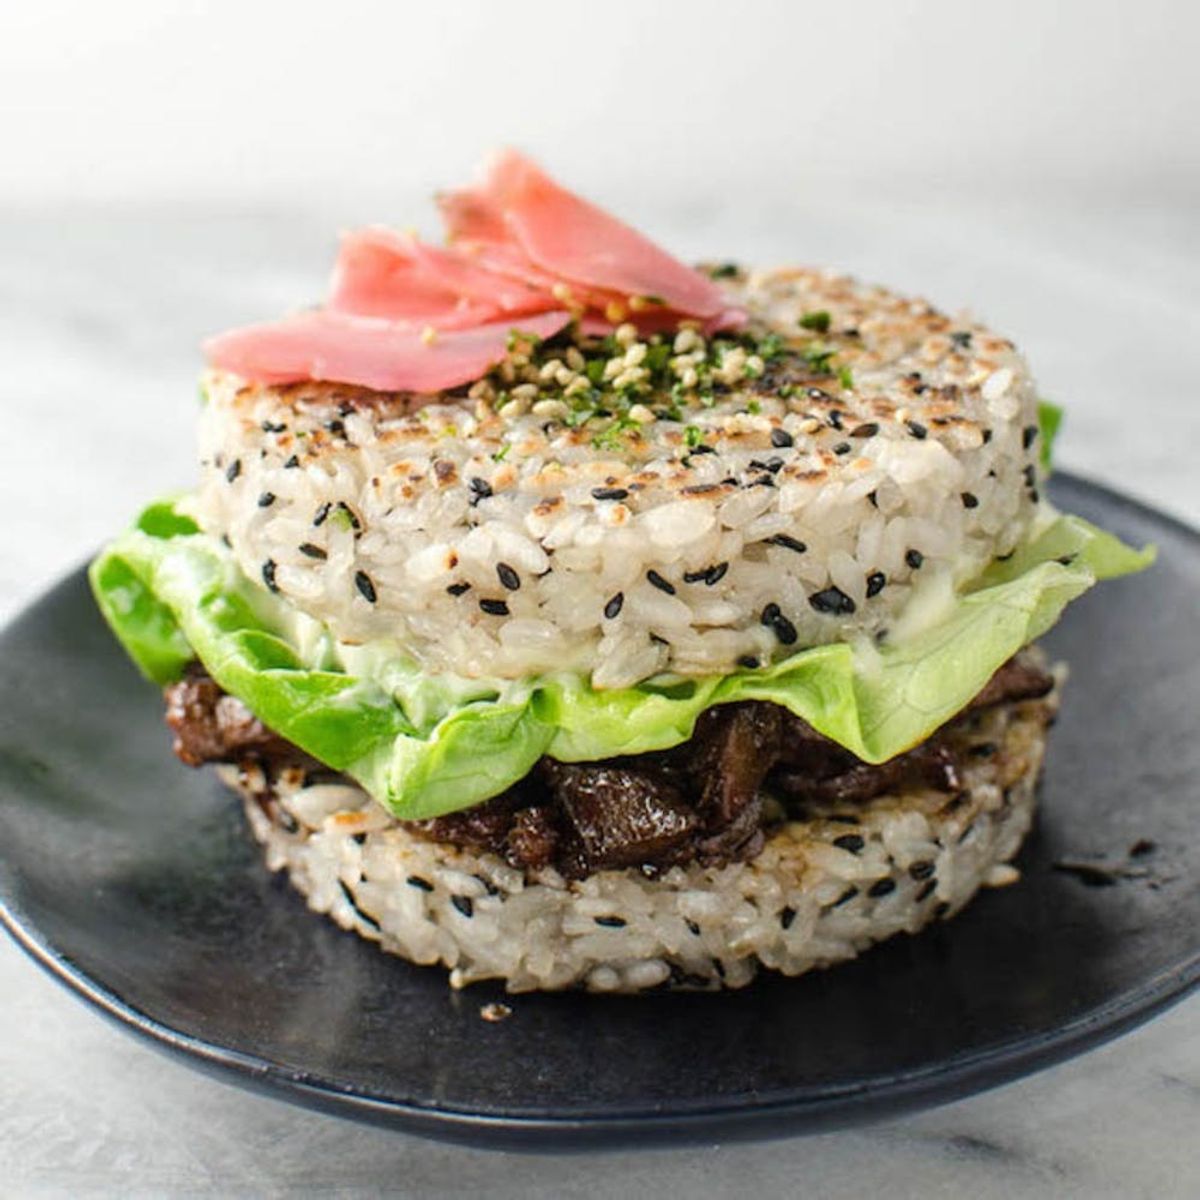 10 Sushi Burgers That Are a Foodie’s Dream Come True